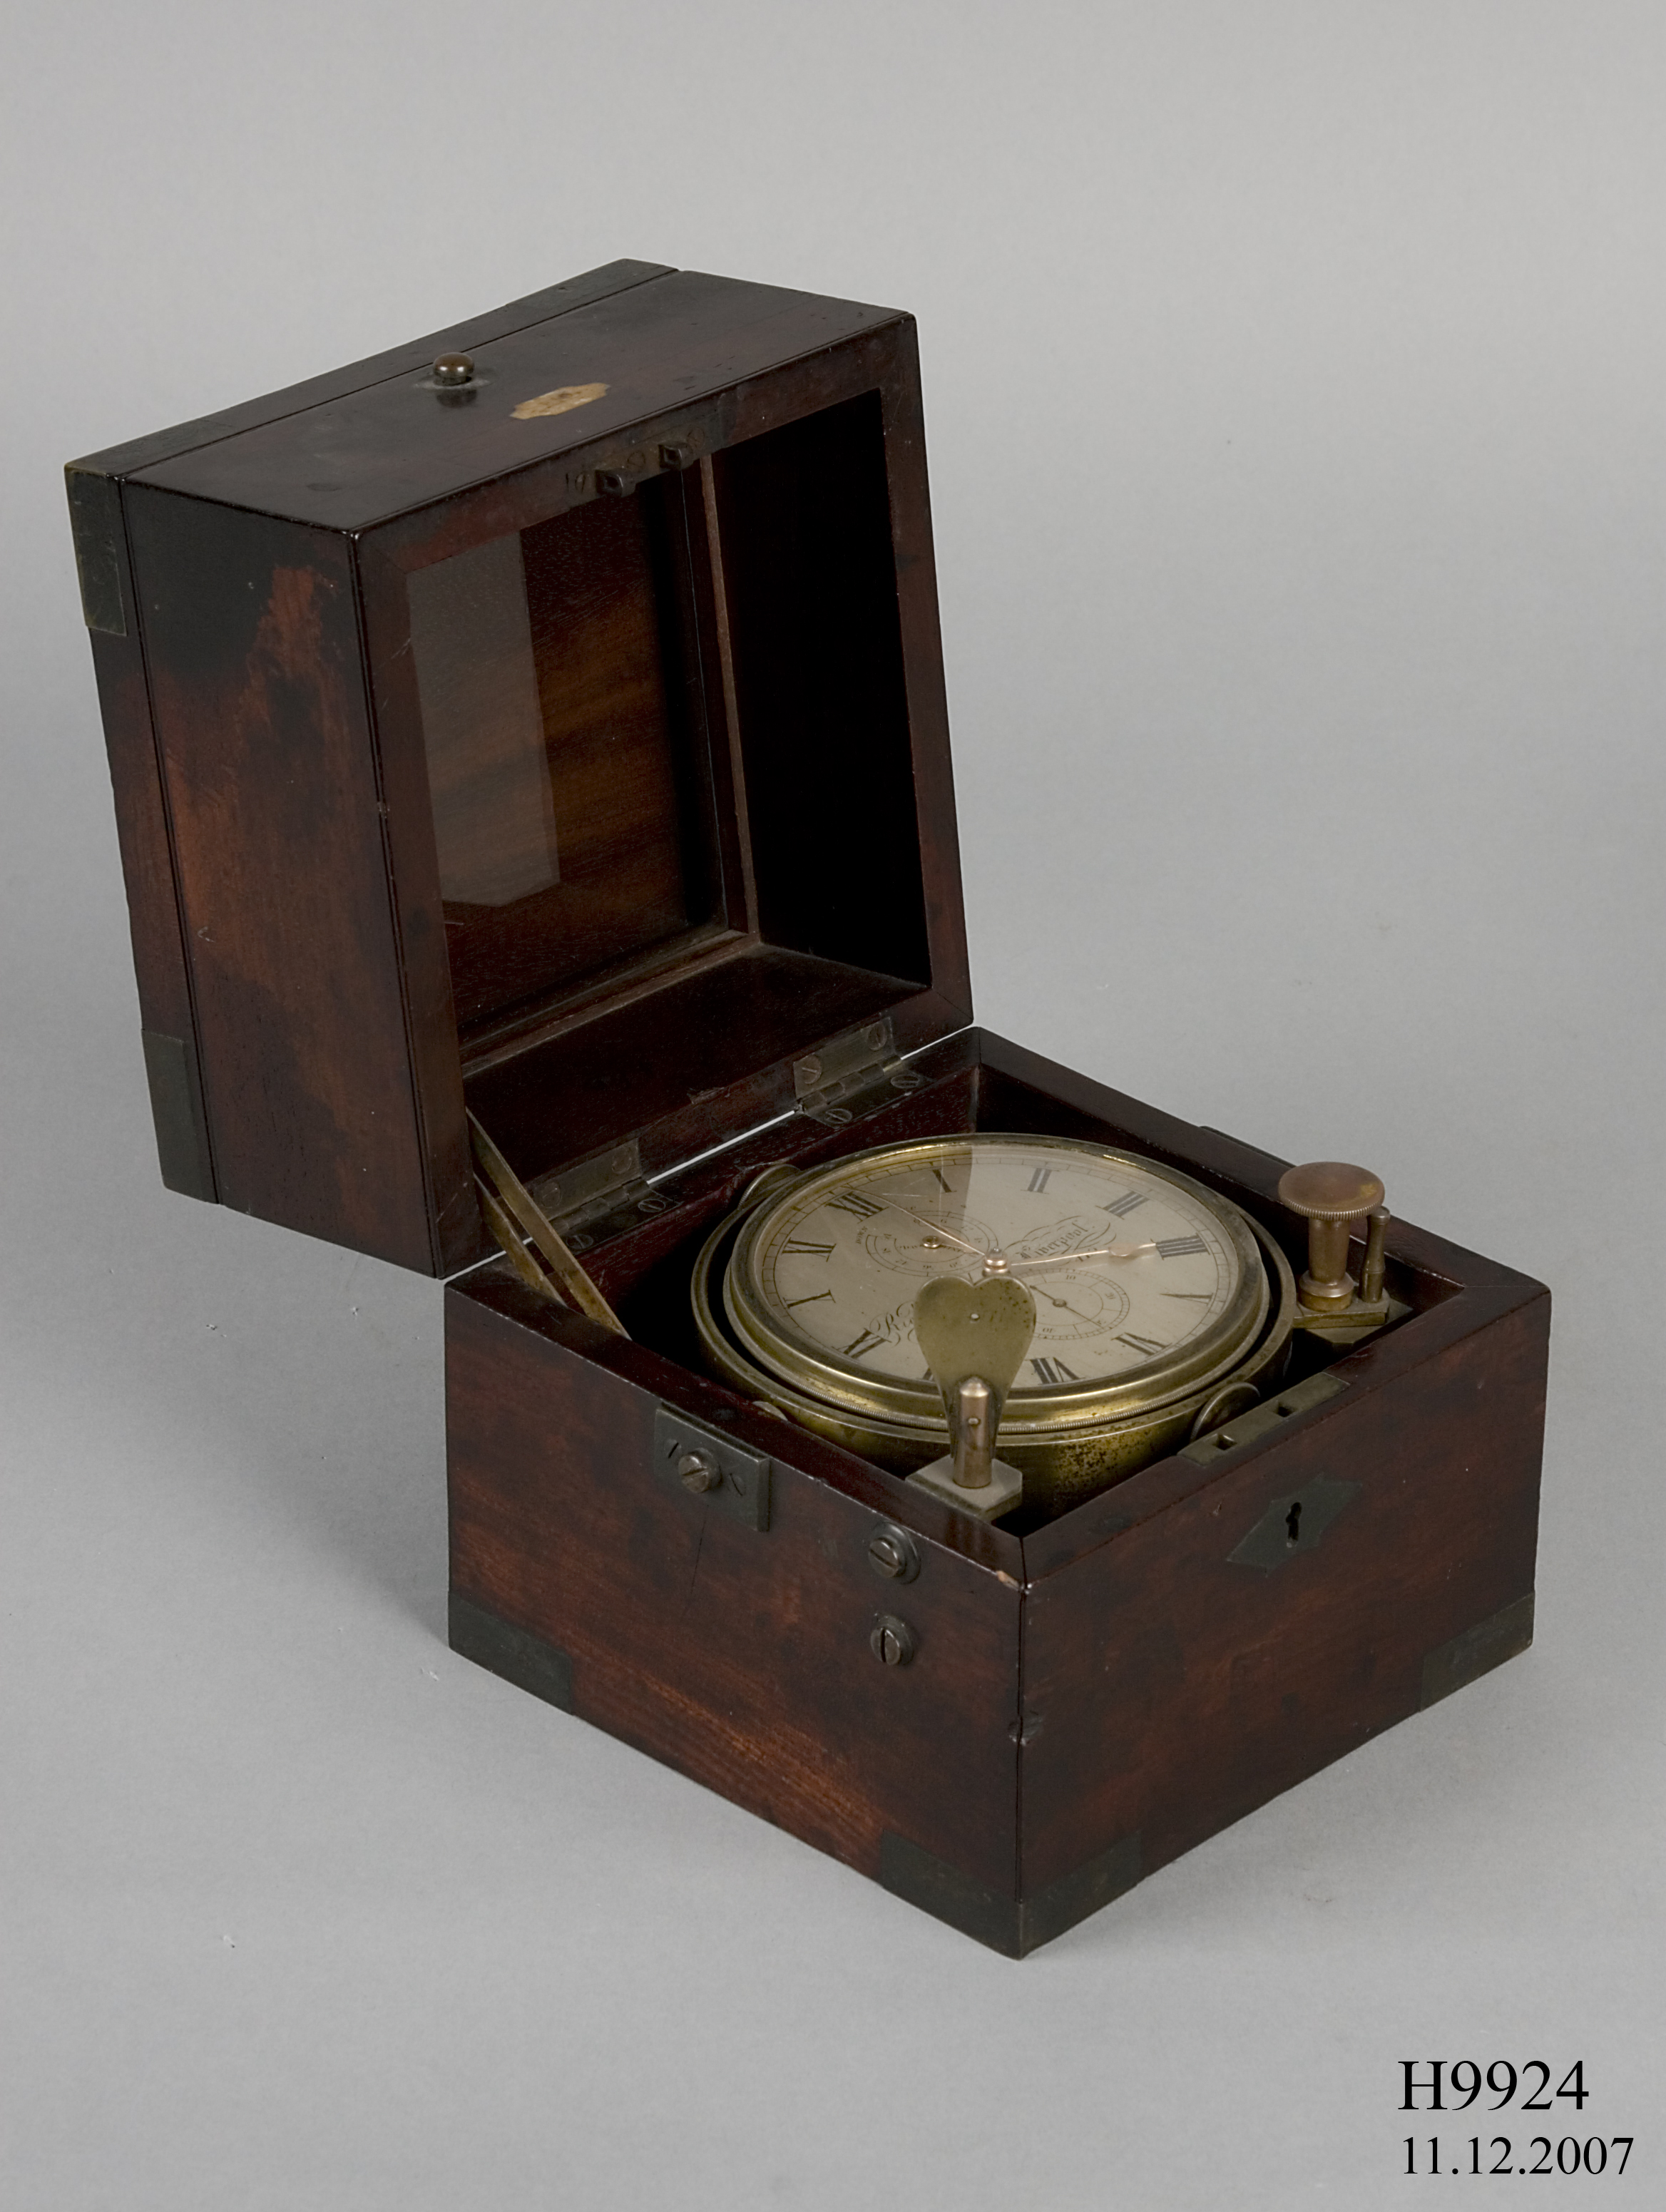 Chronometer made by Richard Hornby